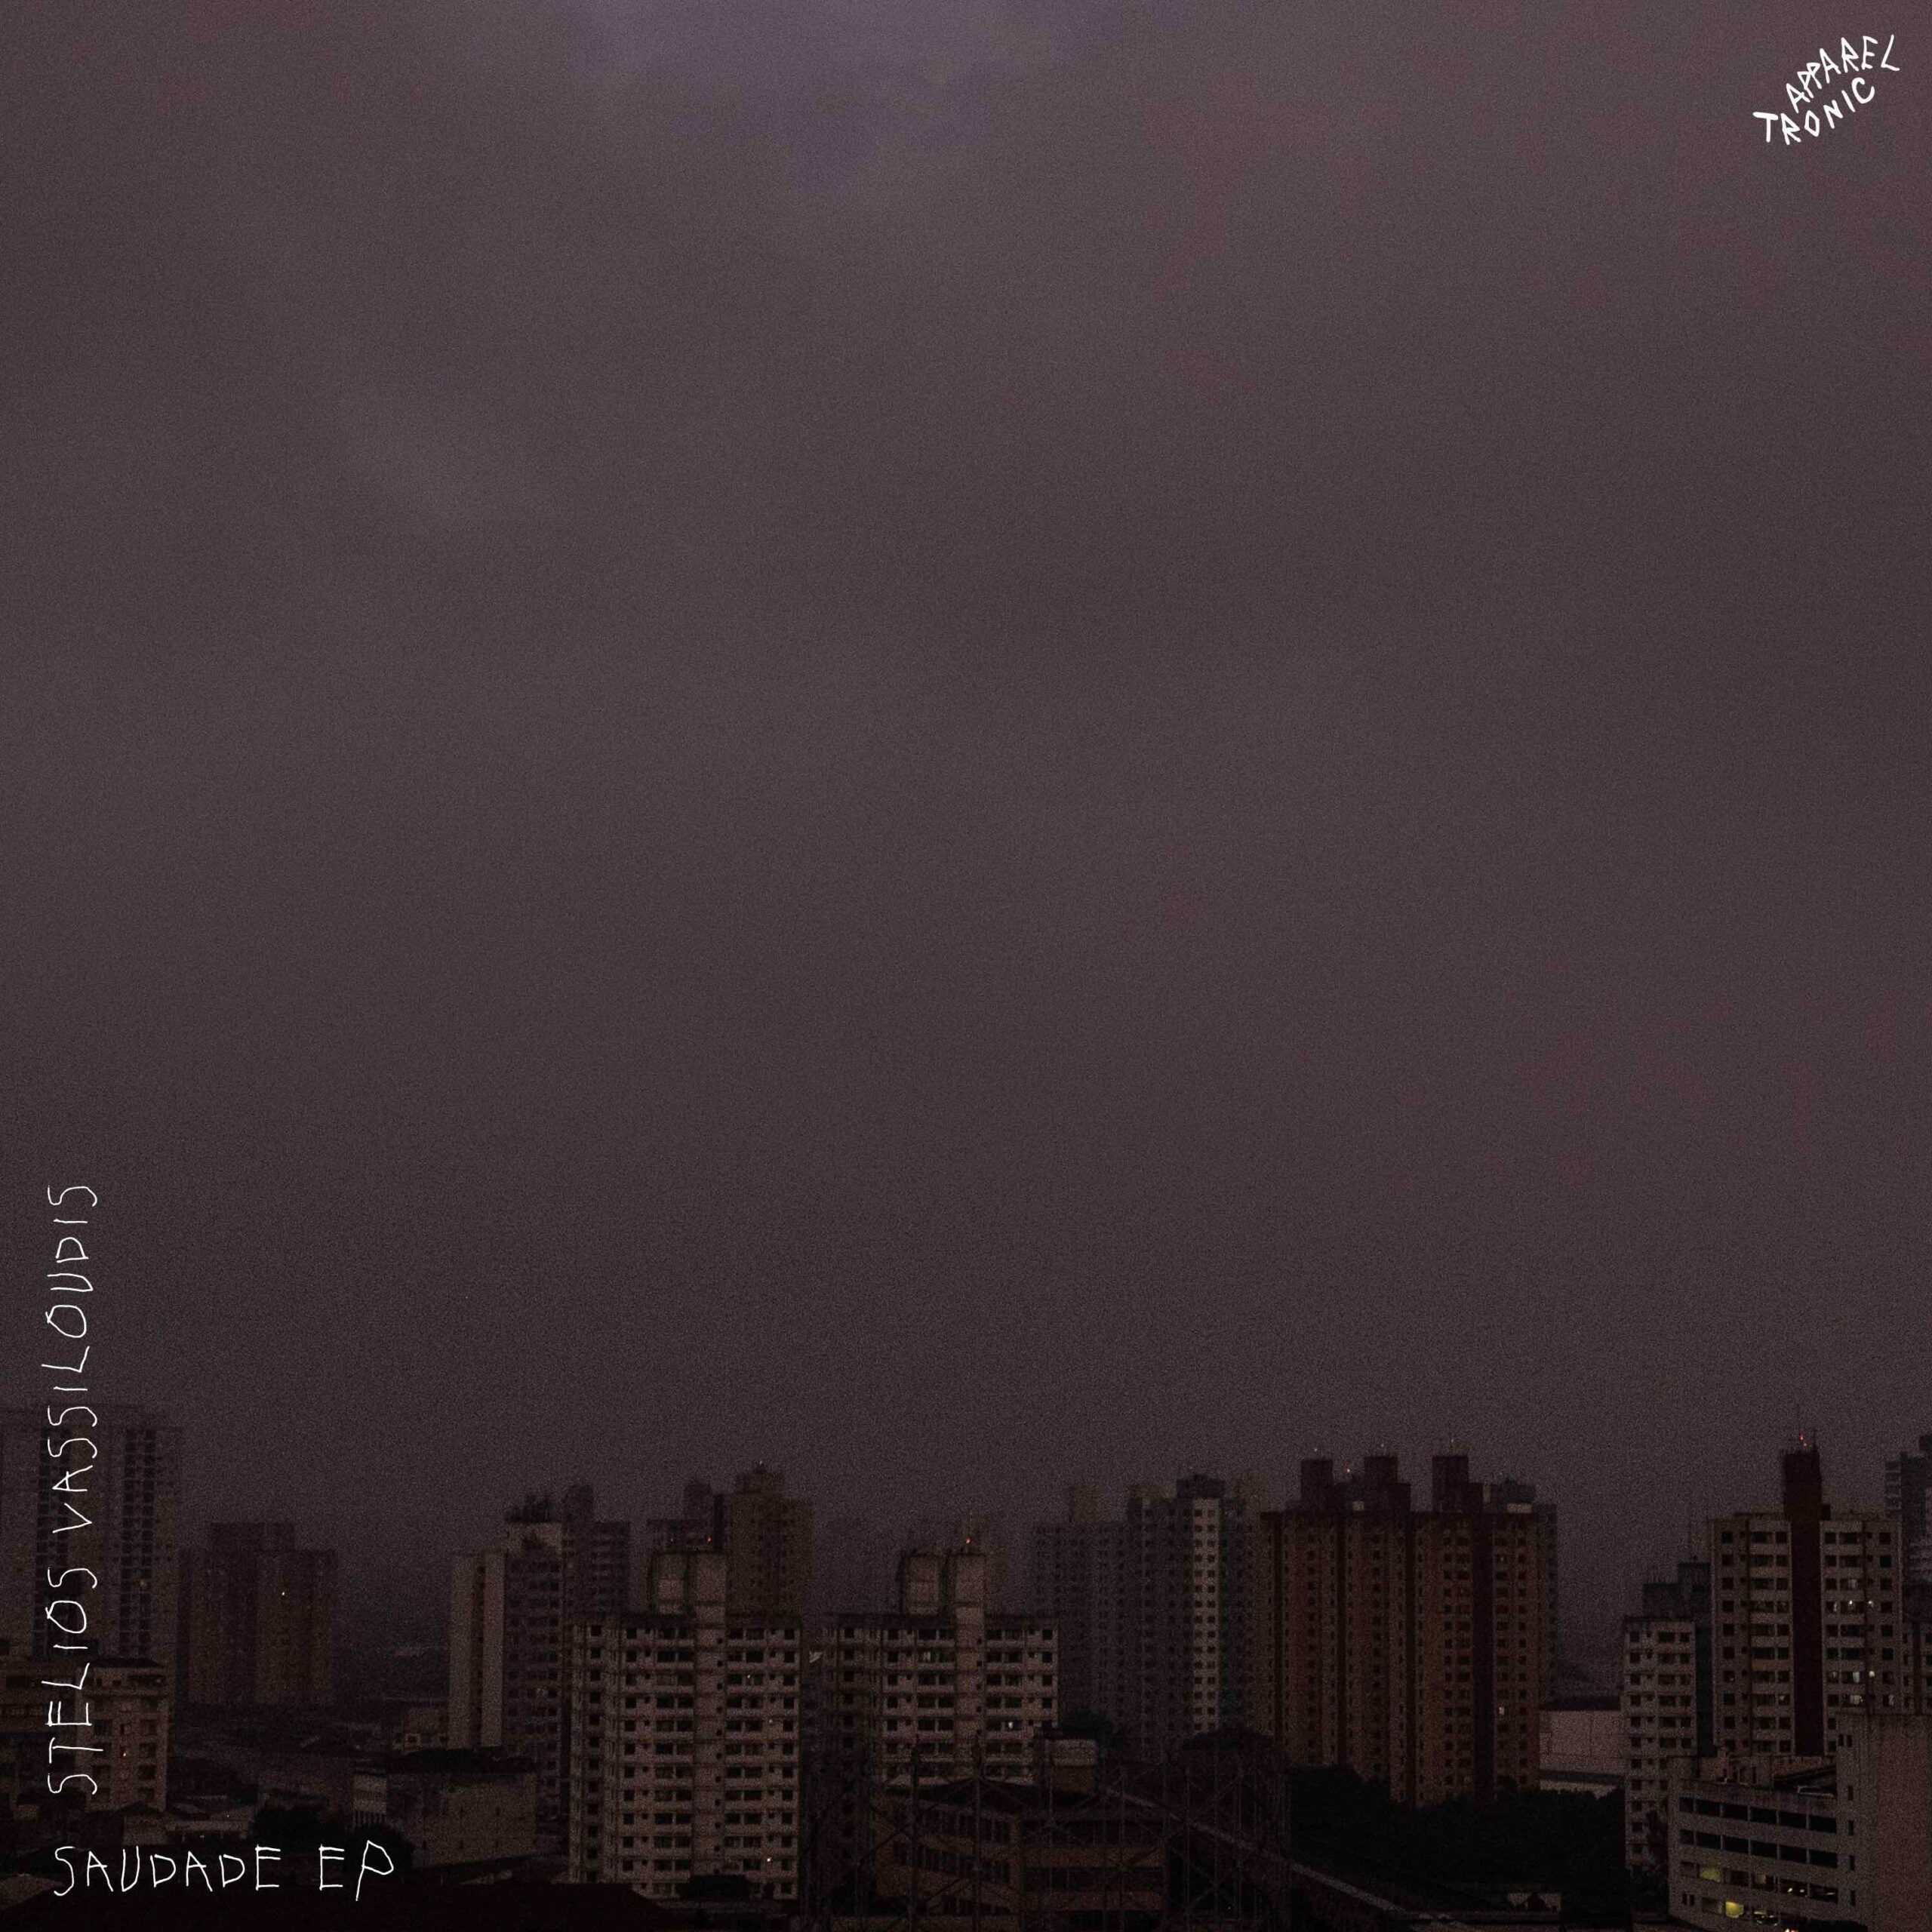 Out now Saudade EP by Stelios Vassiloudis